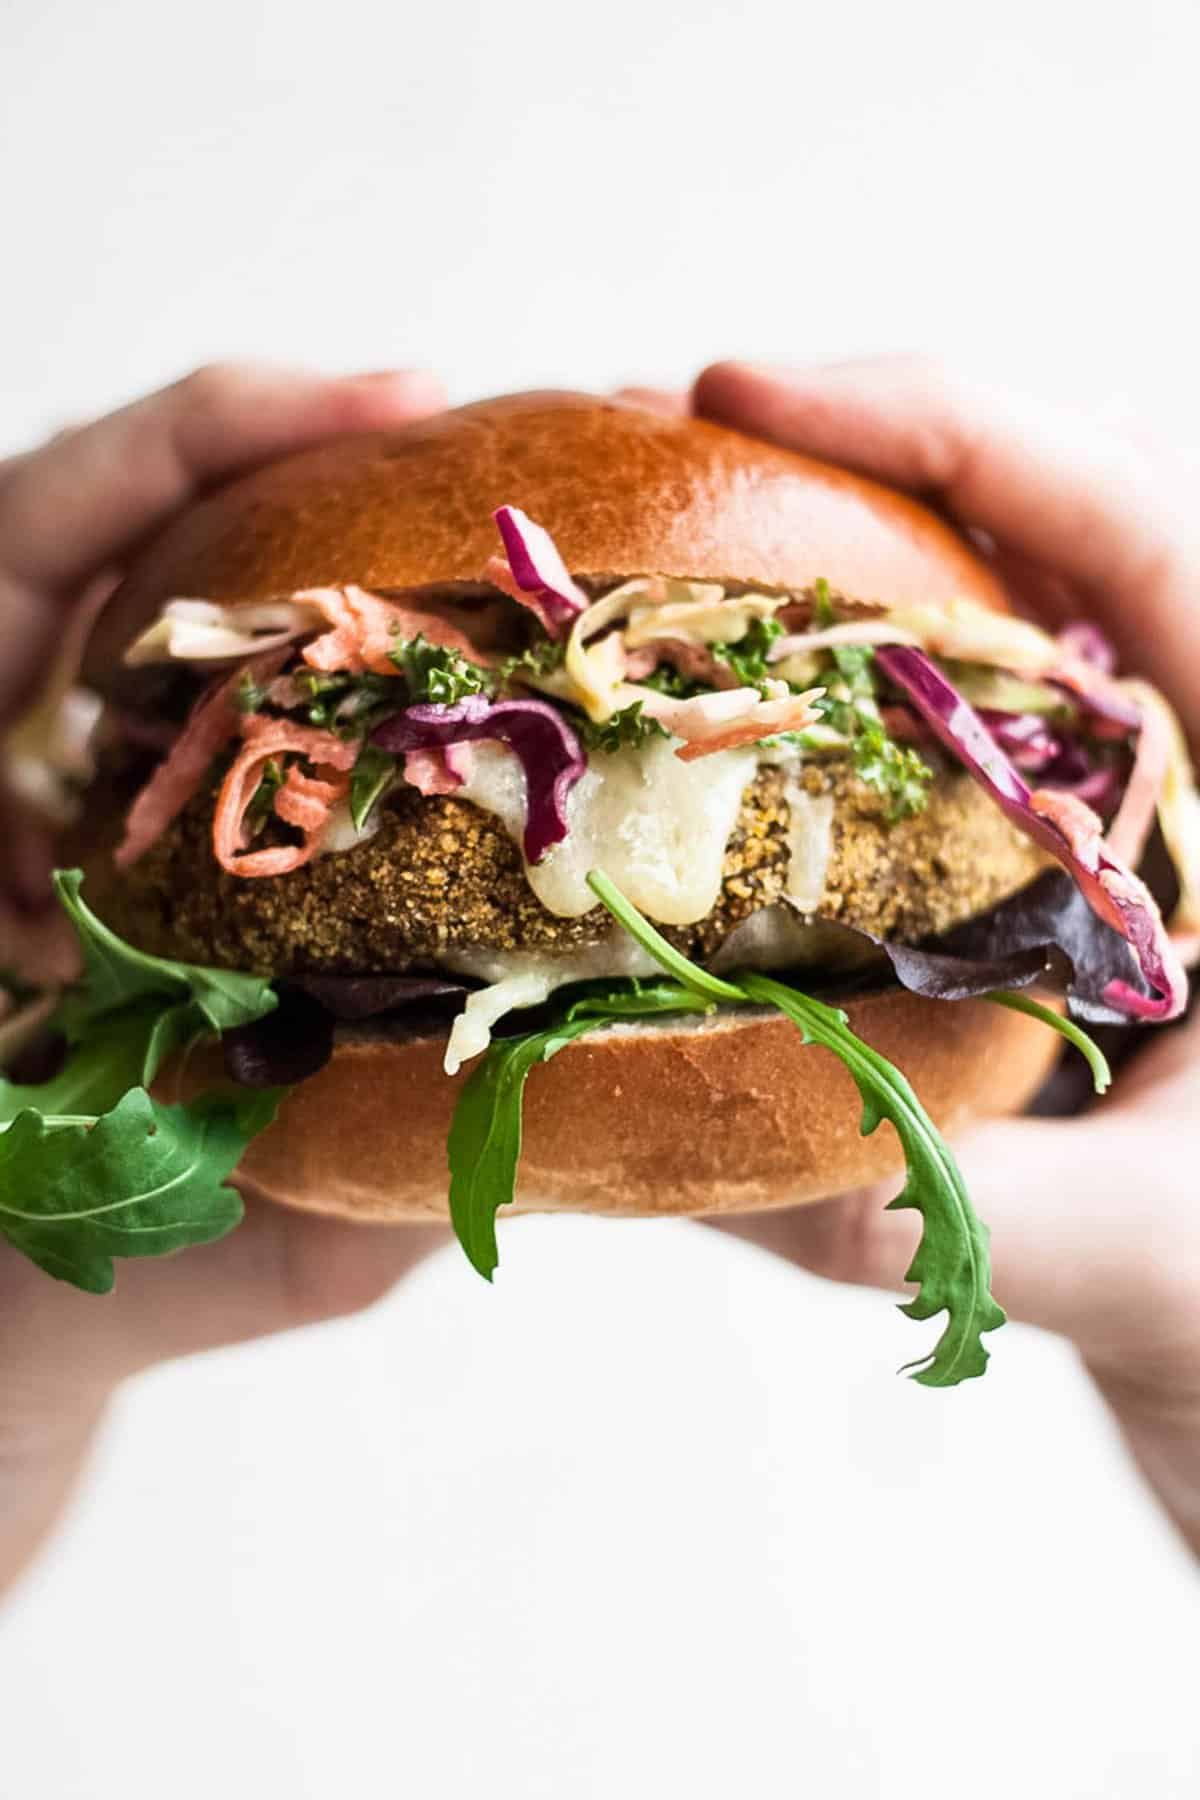 A veggie burger with slaw being held by two hands.